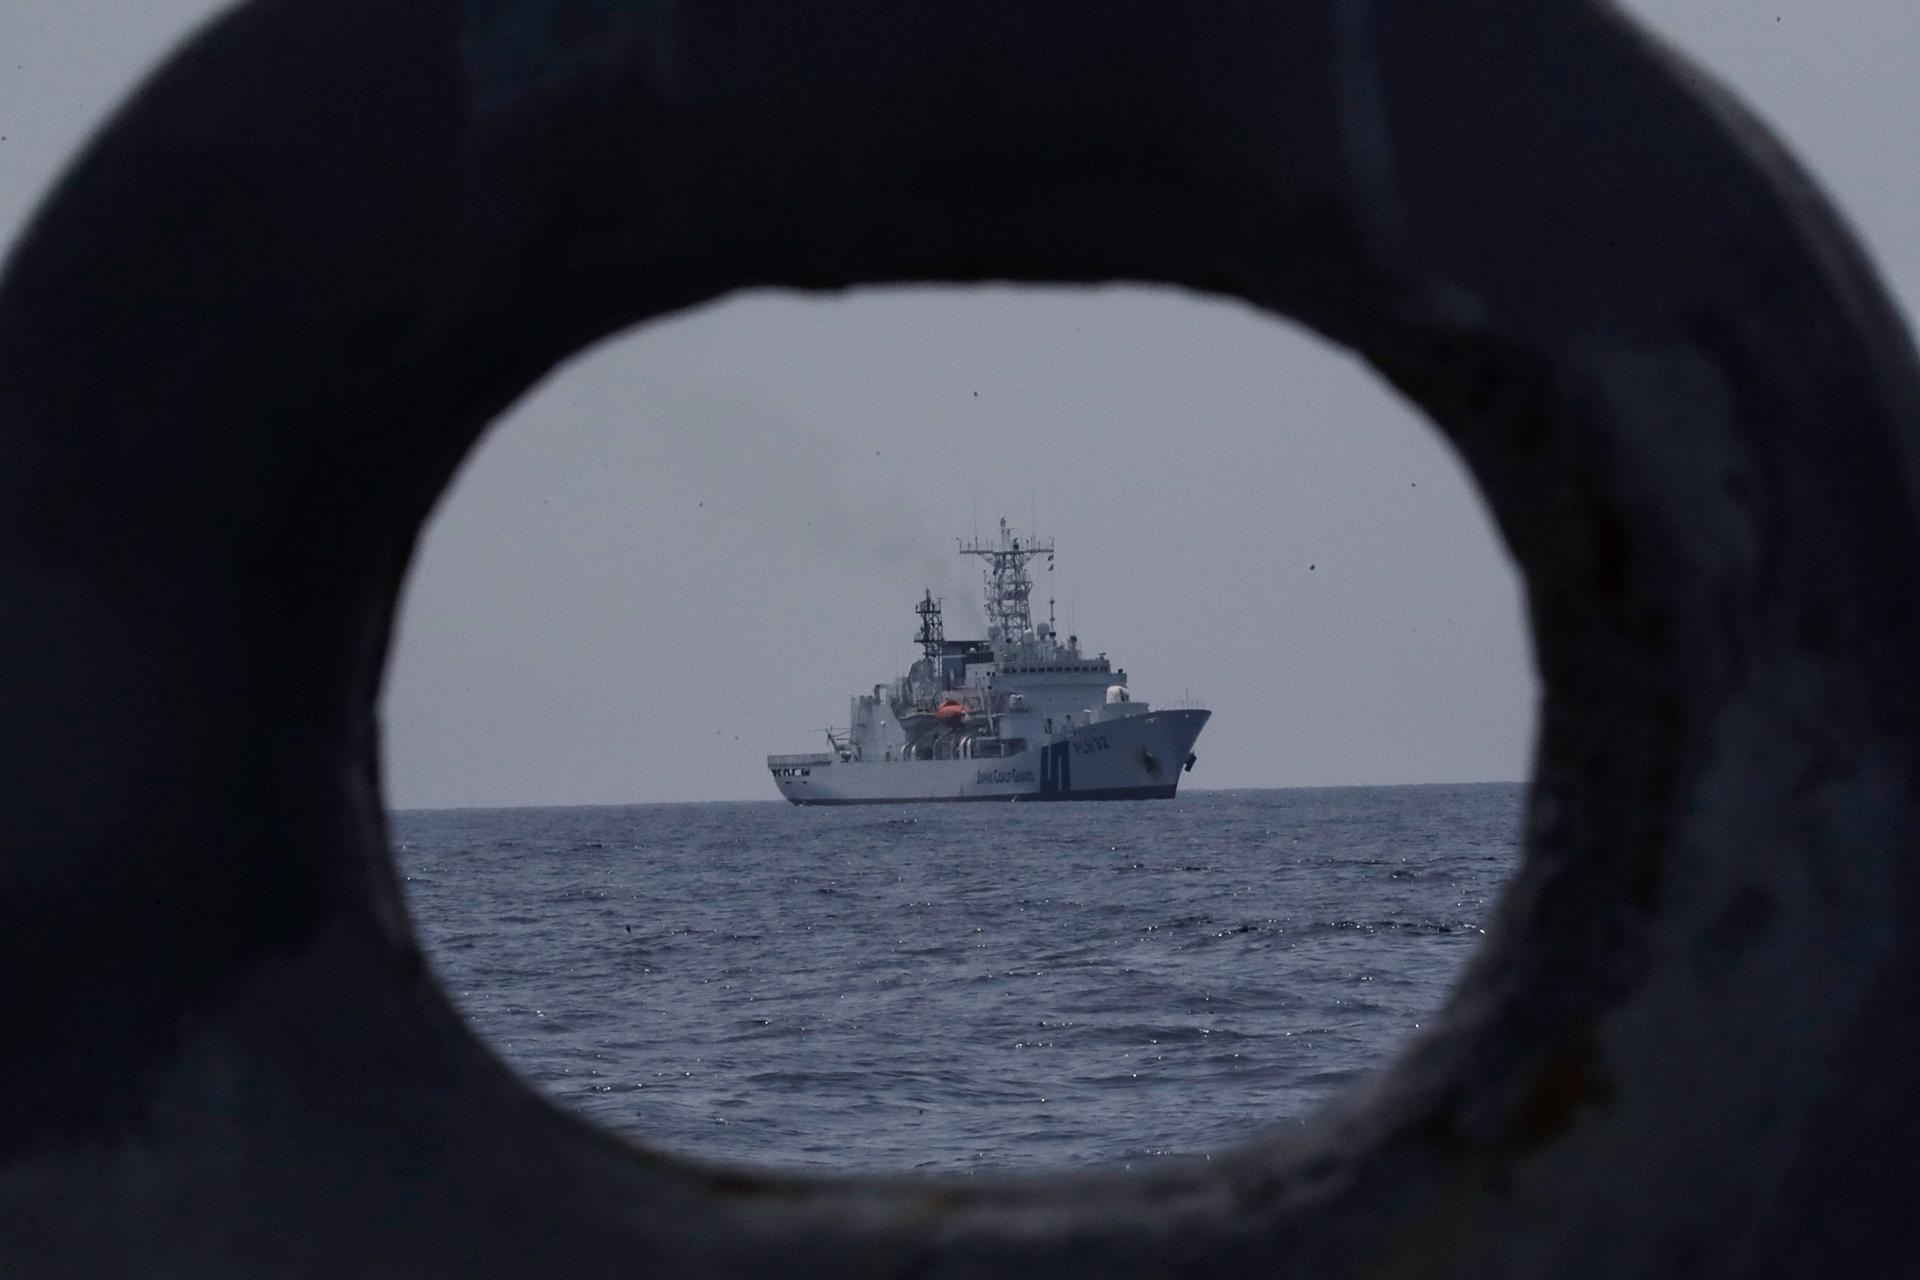 A file picture showing a patrol ship in the waters of the Philippines in the South China Sea. EFE/EPA/FILE/FRANCIS R. MALASIG